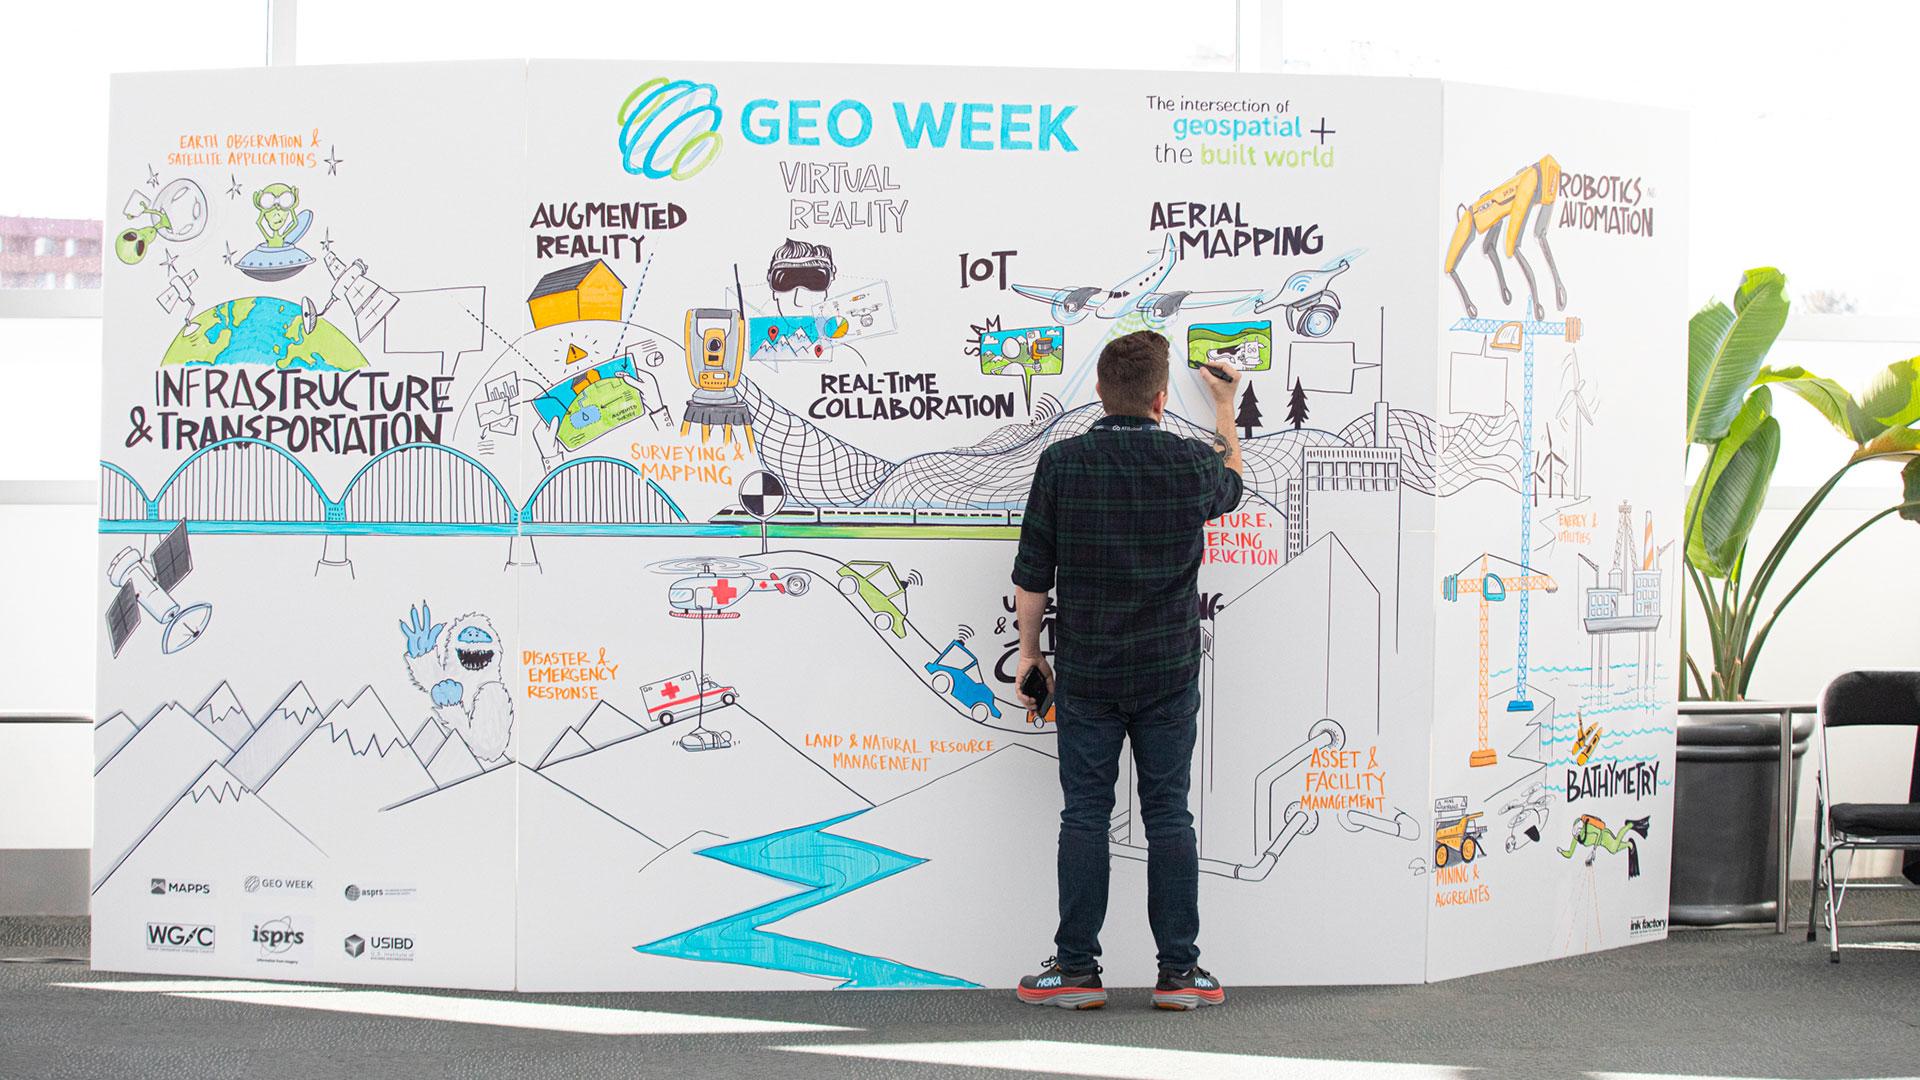 GEO Week reflects the desire for an organisation that can bring together the best Earth observation data, technologies and science and translate them into free, reliable information that makes sense for everyone.